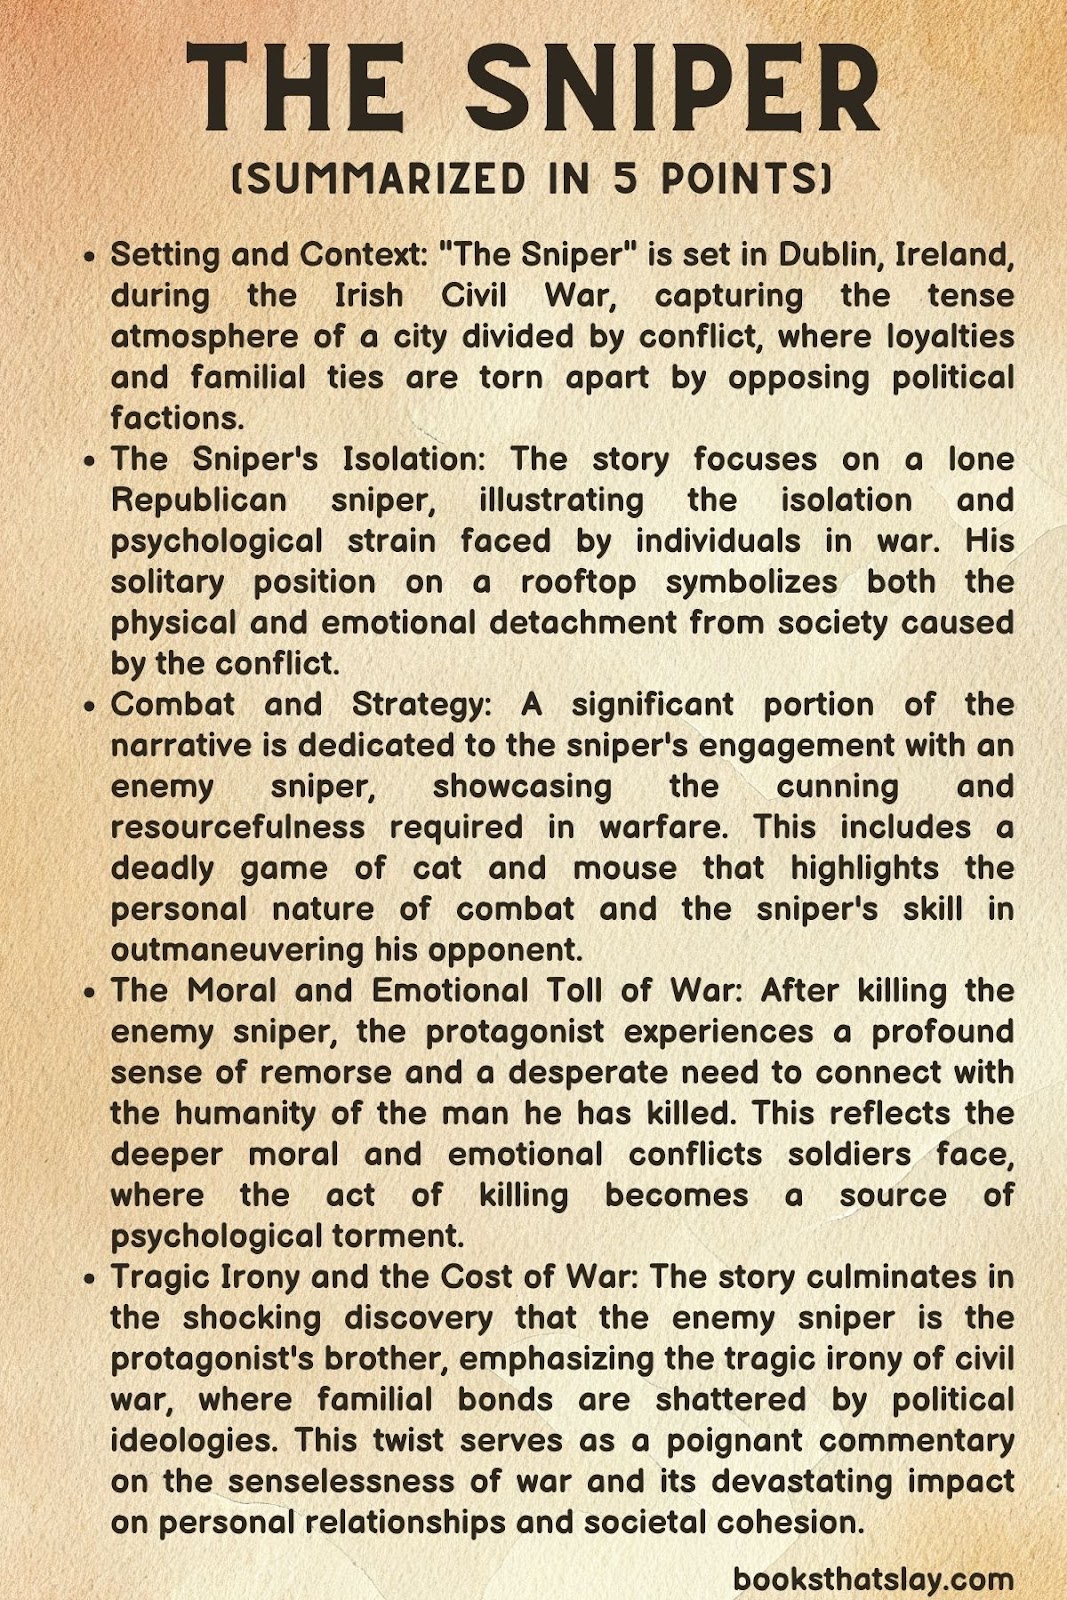 The Sniper Summary, Characters and Themes